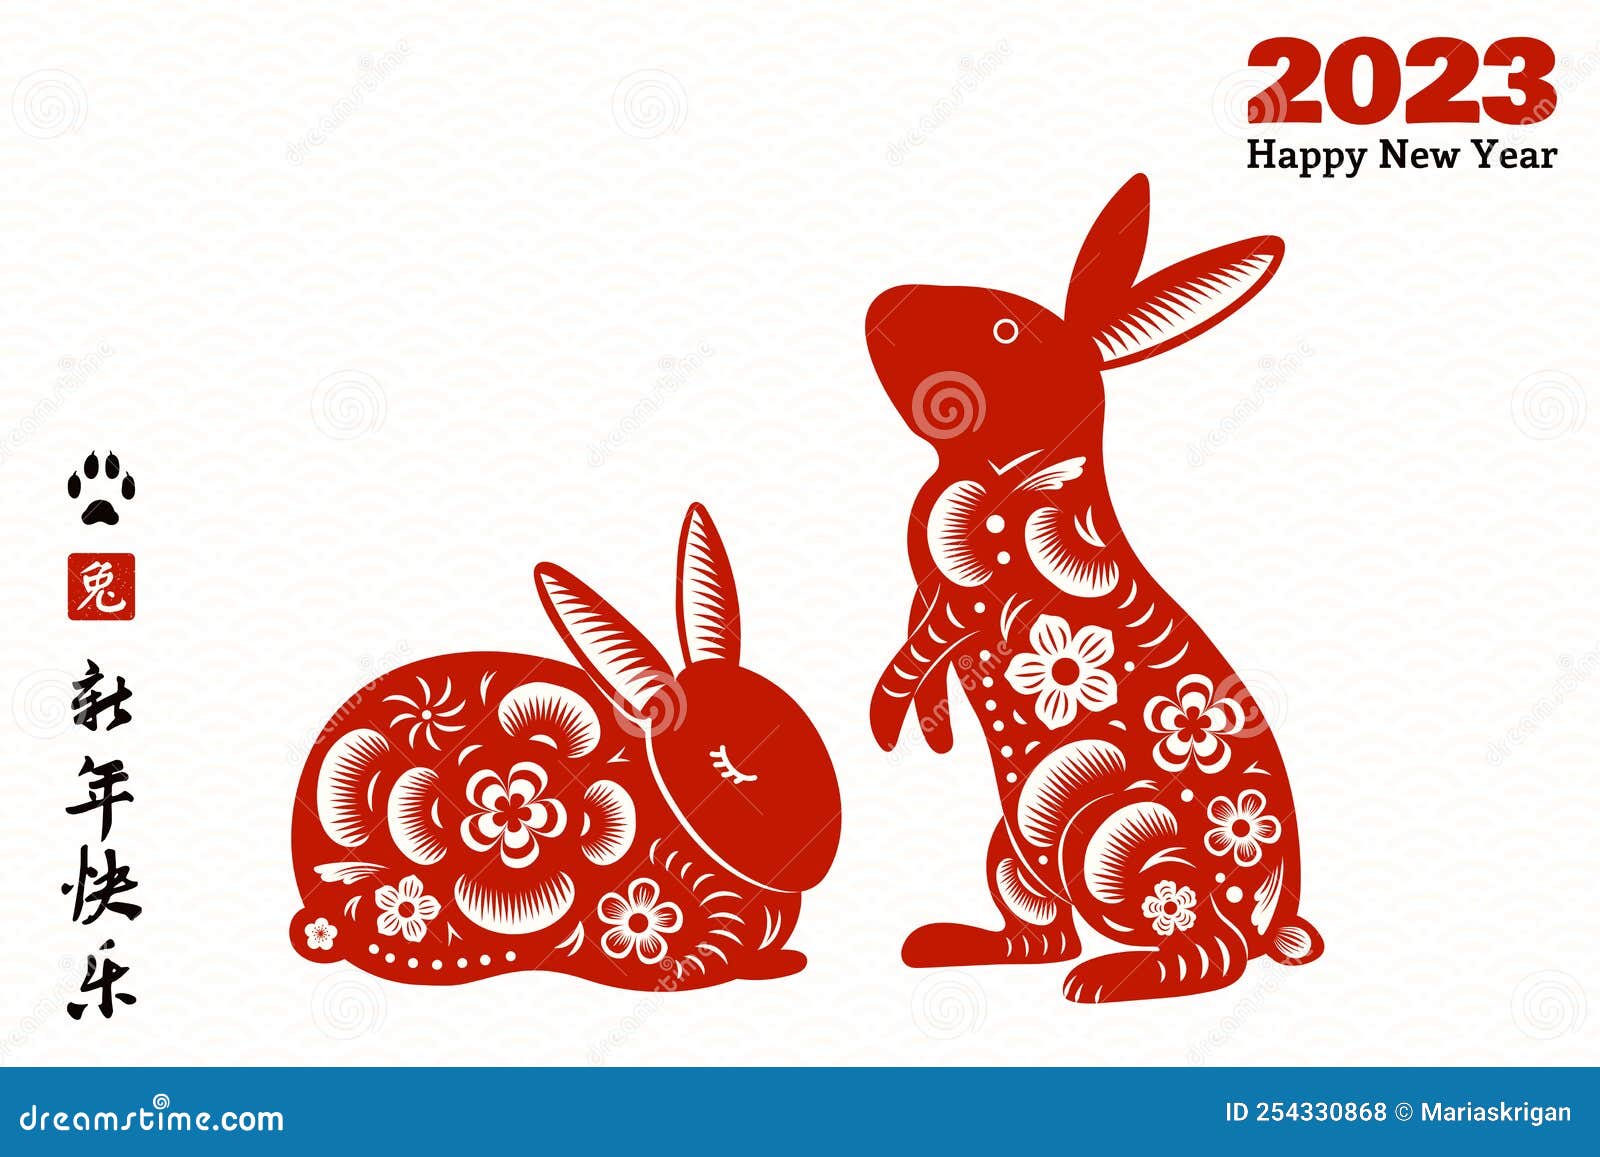 2023 Chinese New Year Rabbit Design, Red on White Stock Vector